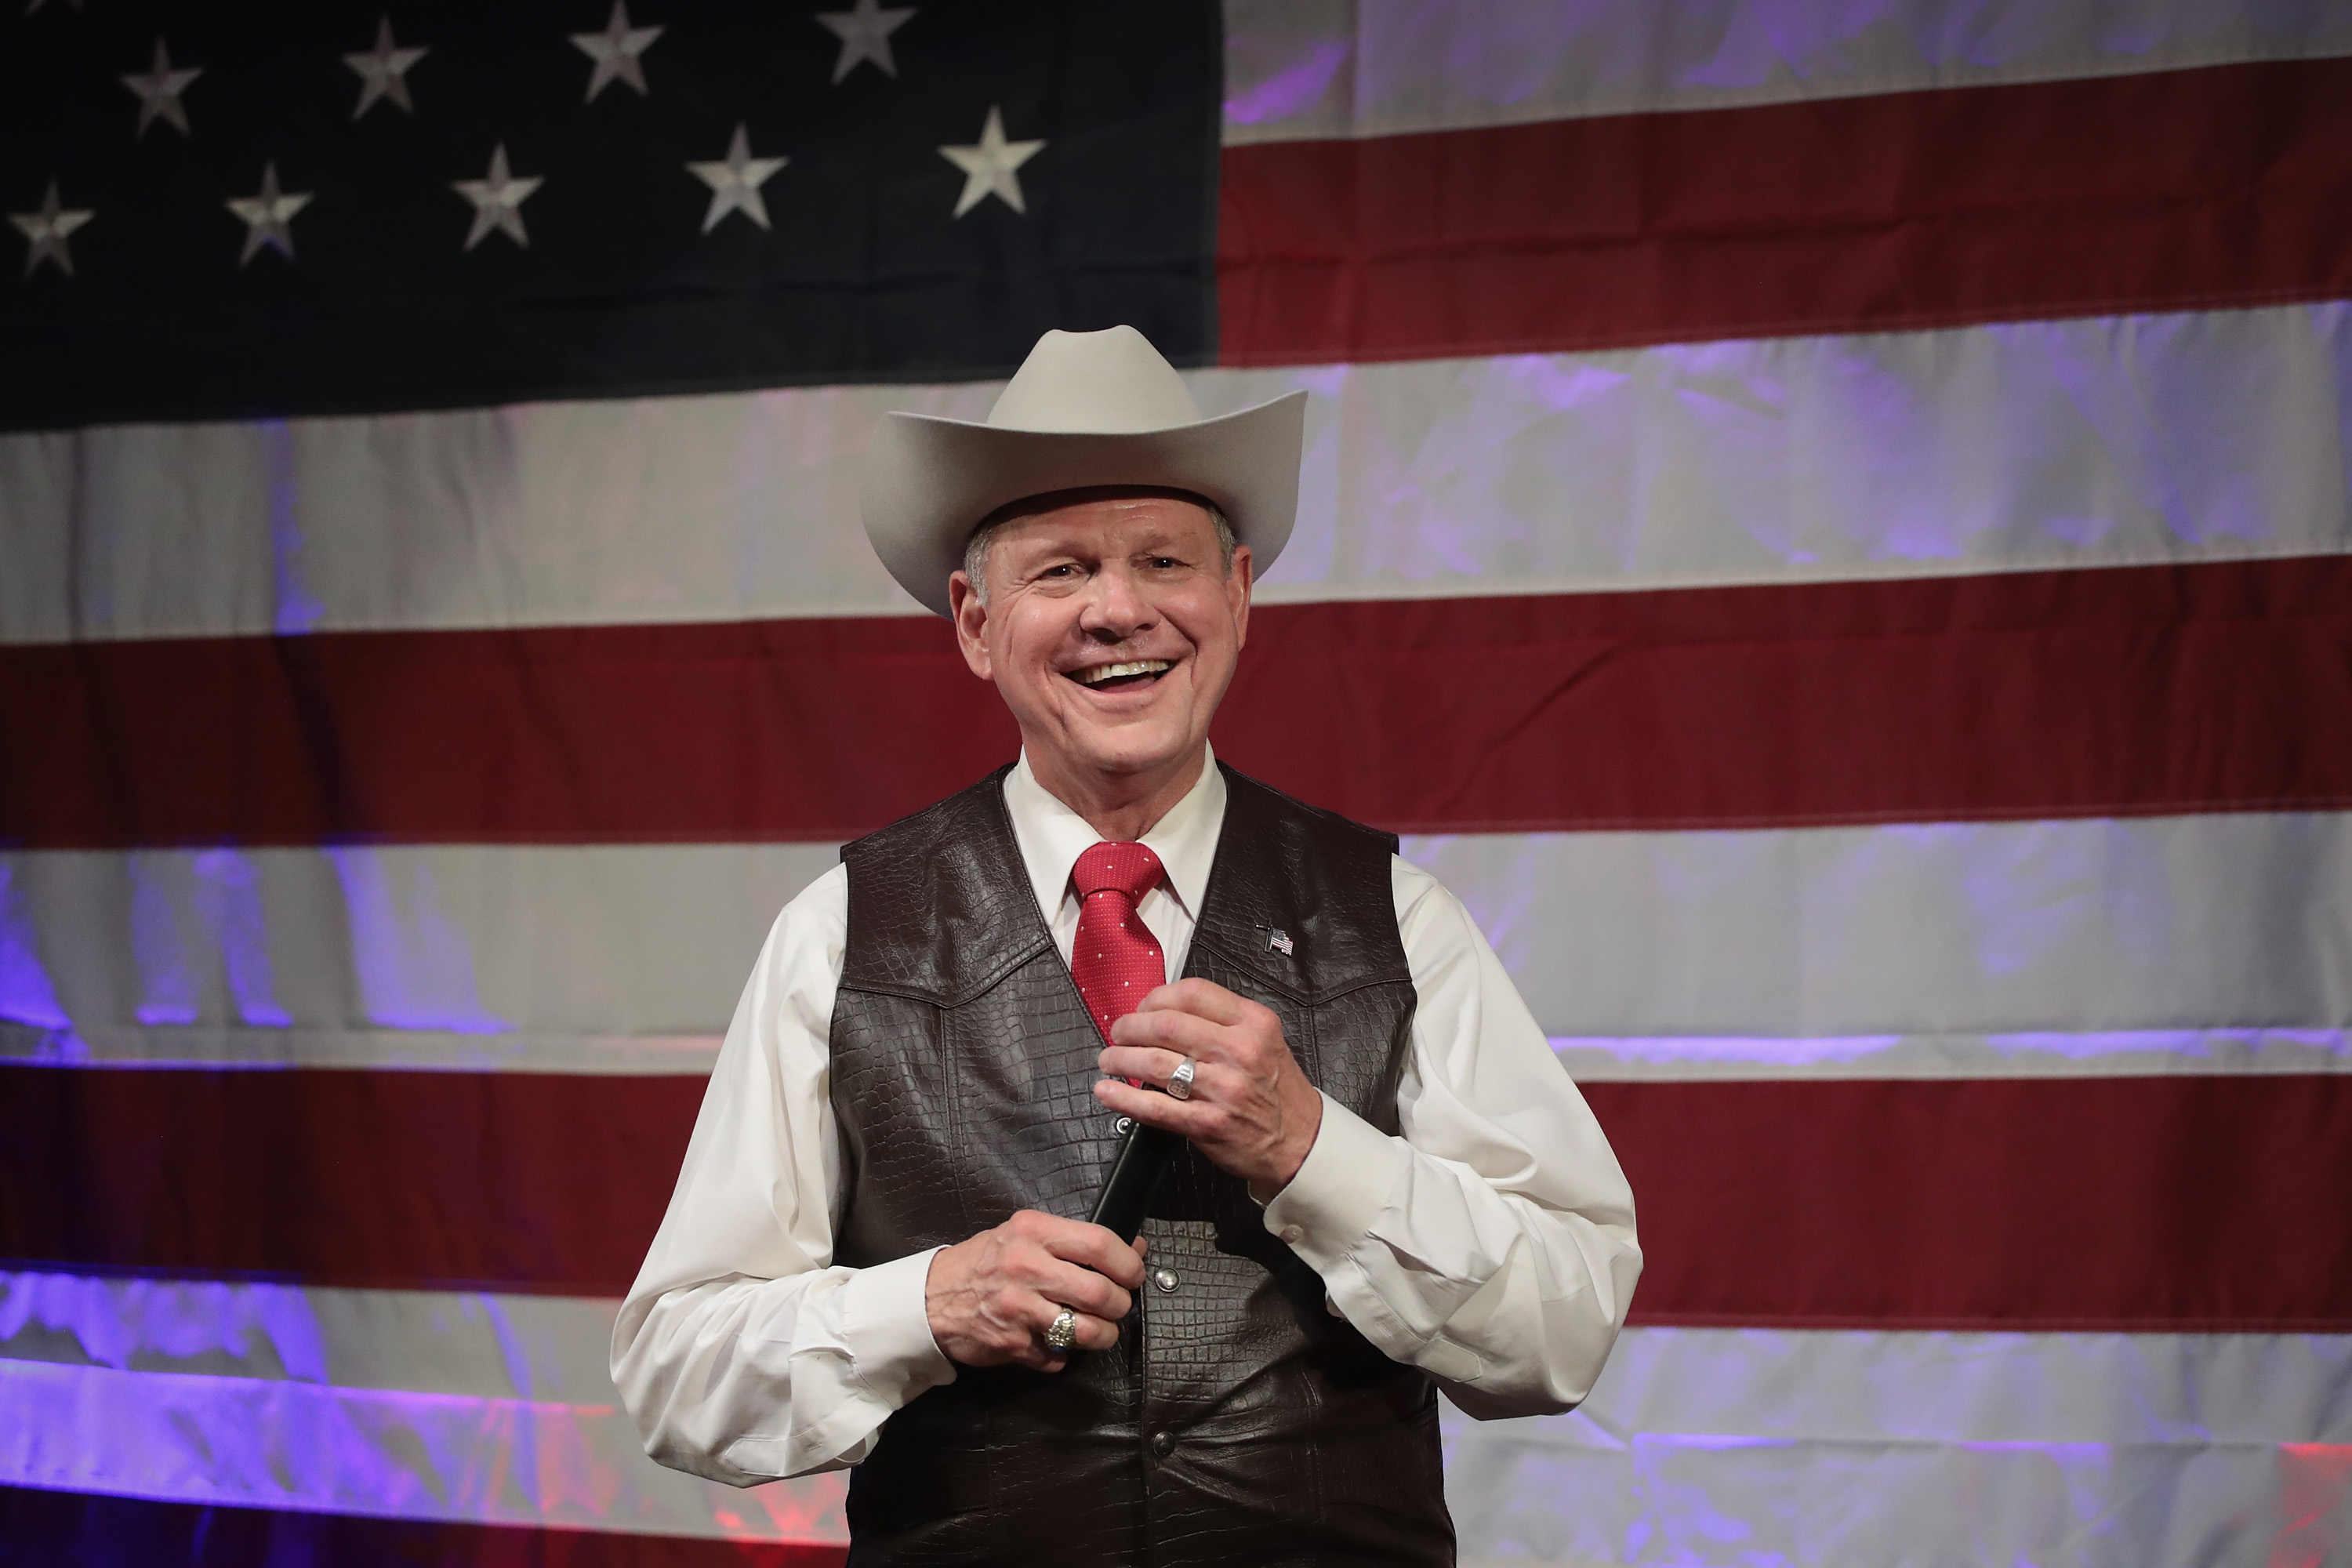 Roy Moore, speaks at a campaign rallyin Fairhope, Alabama on Sept. 25, 2017. (Scott Olson—Getty Images)